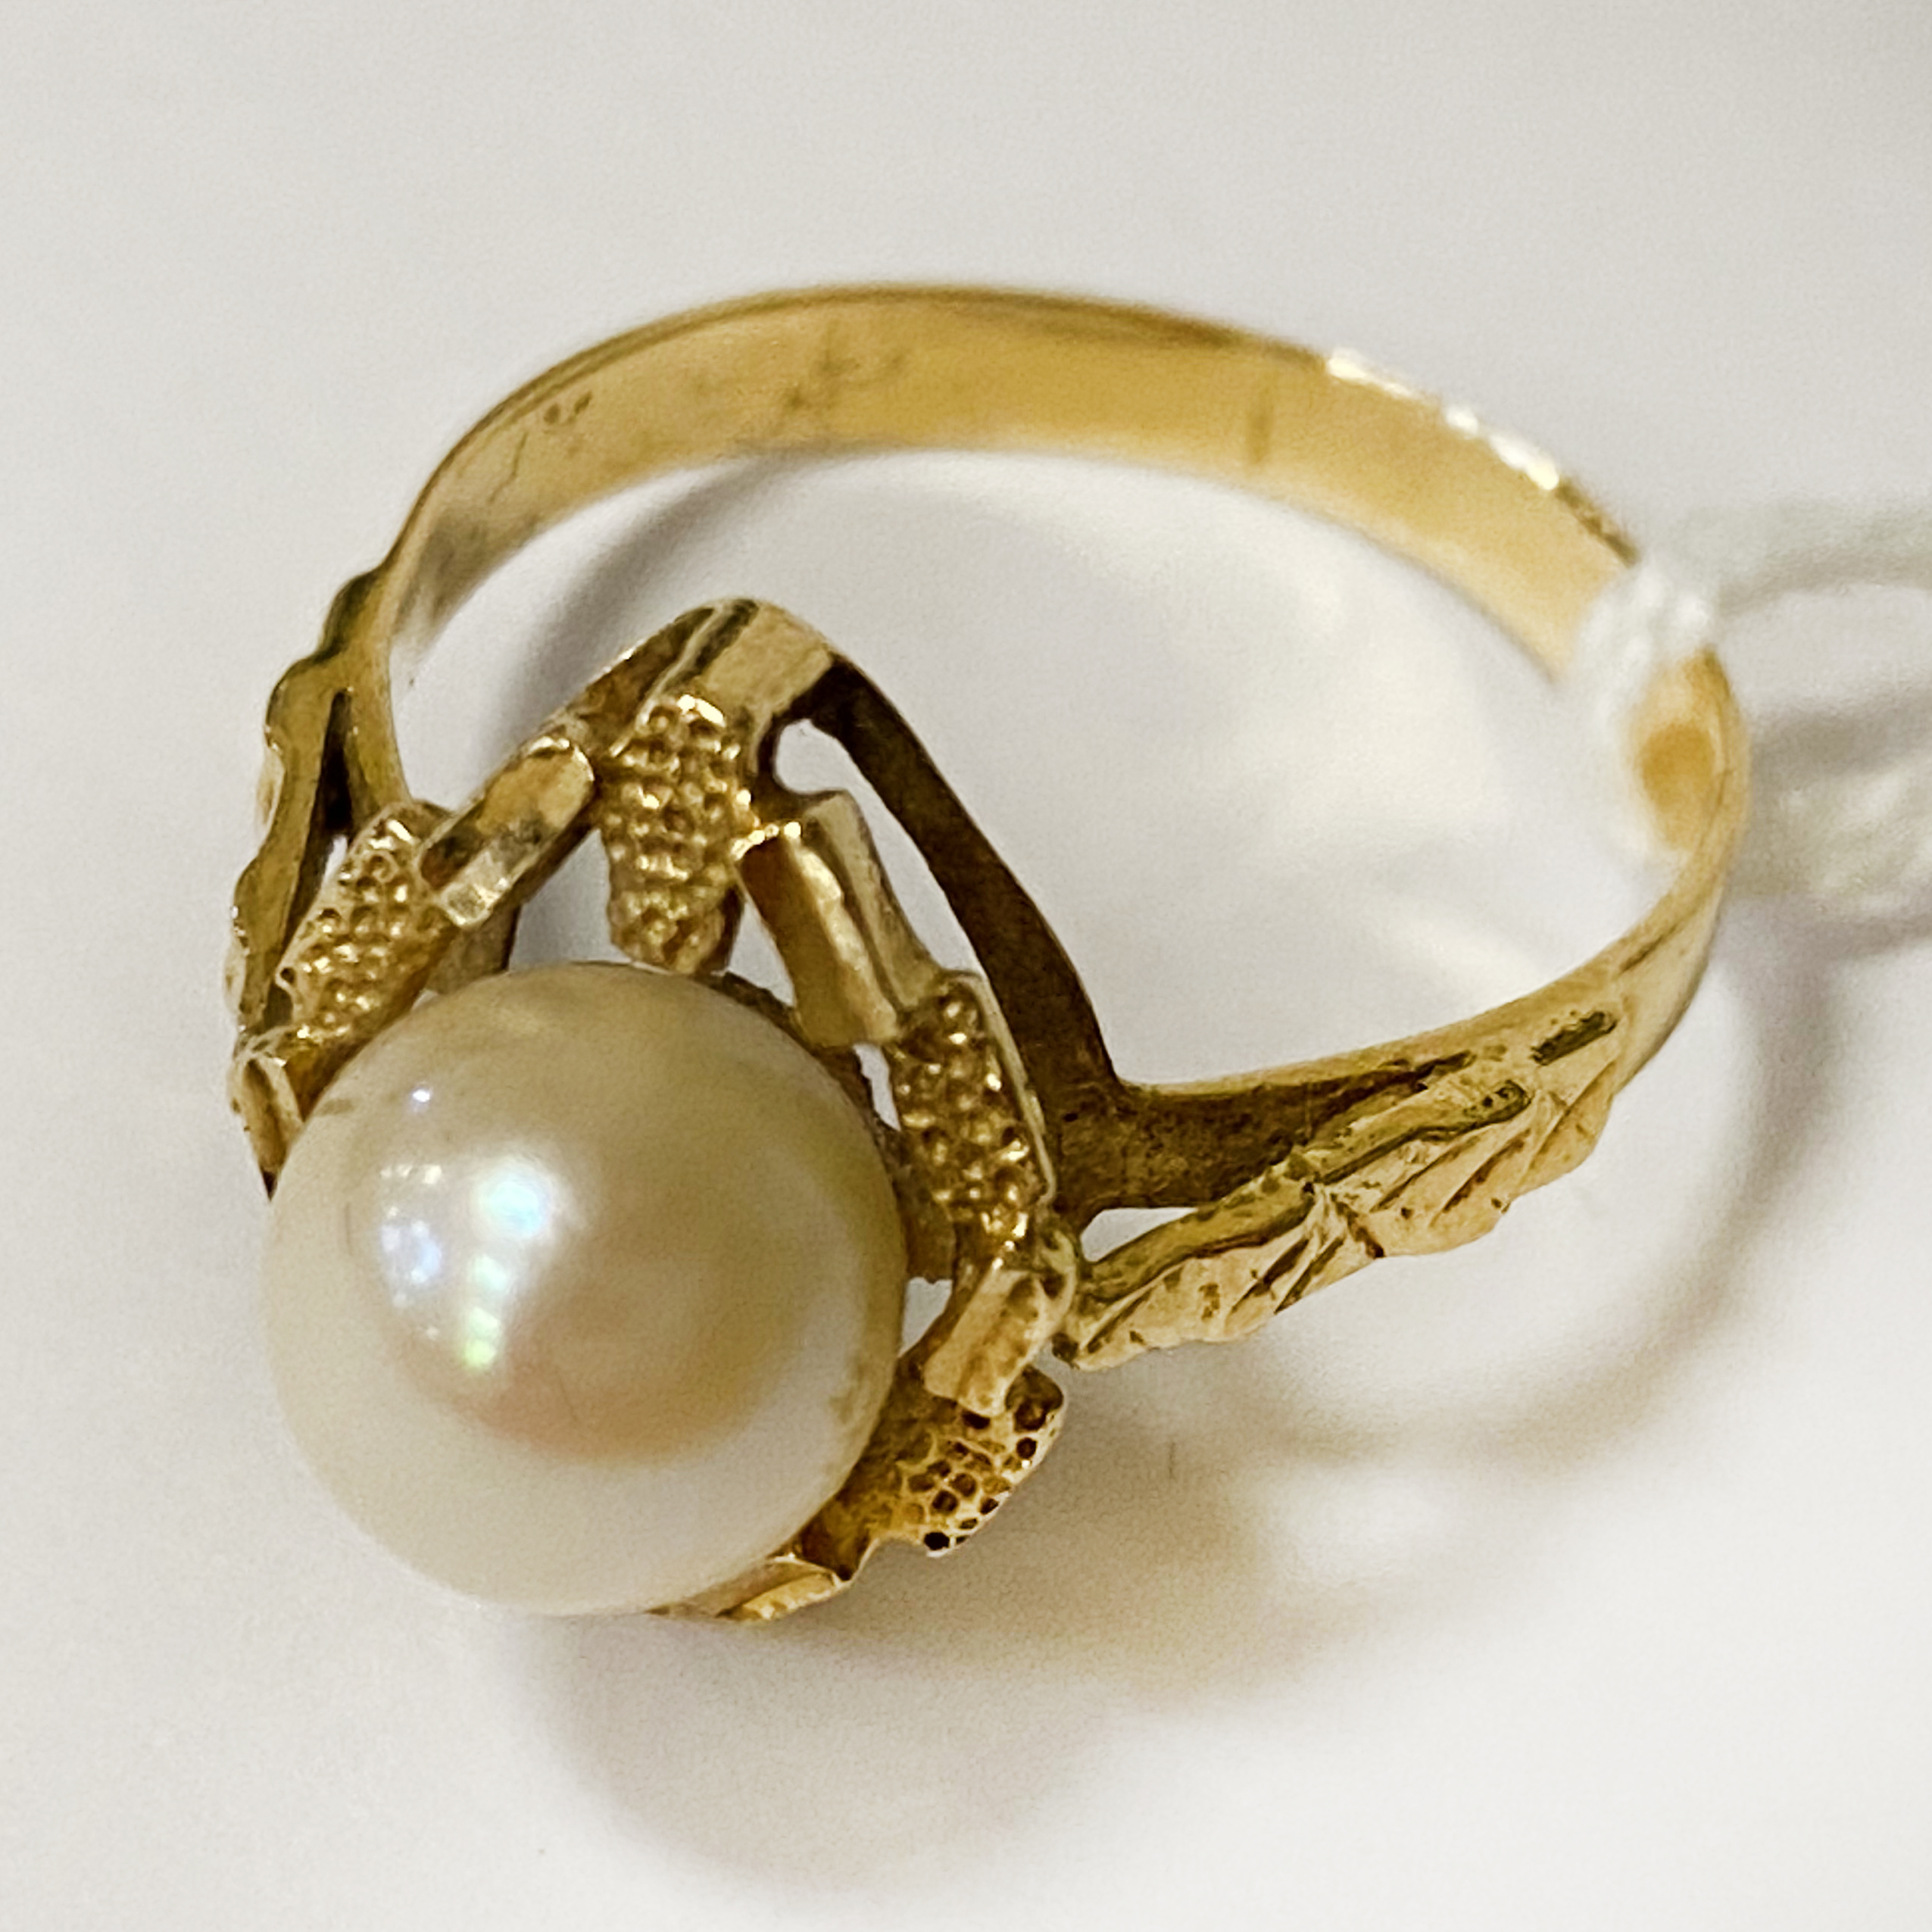 PEARL & GOLD RING 2.7 GRAMS APPROX SIZE M